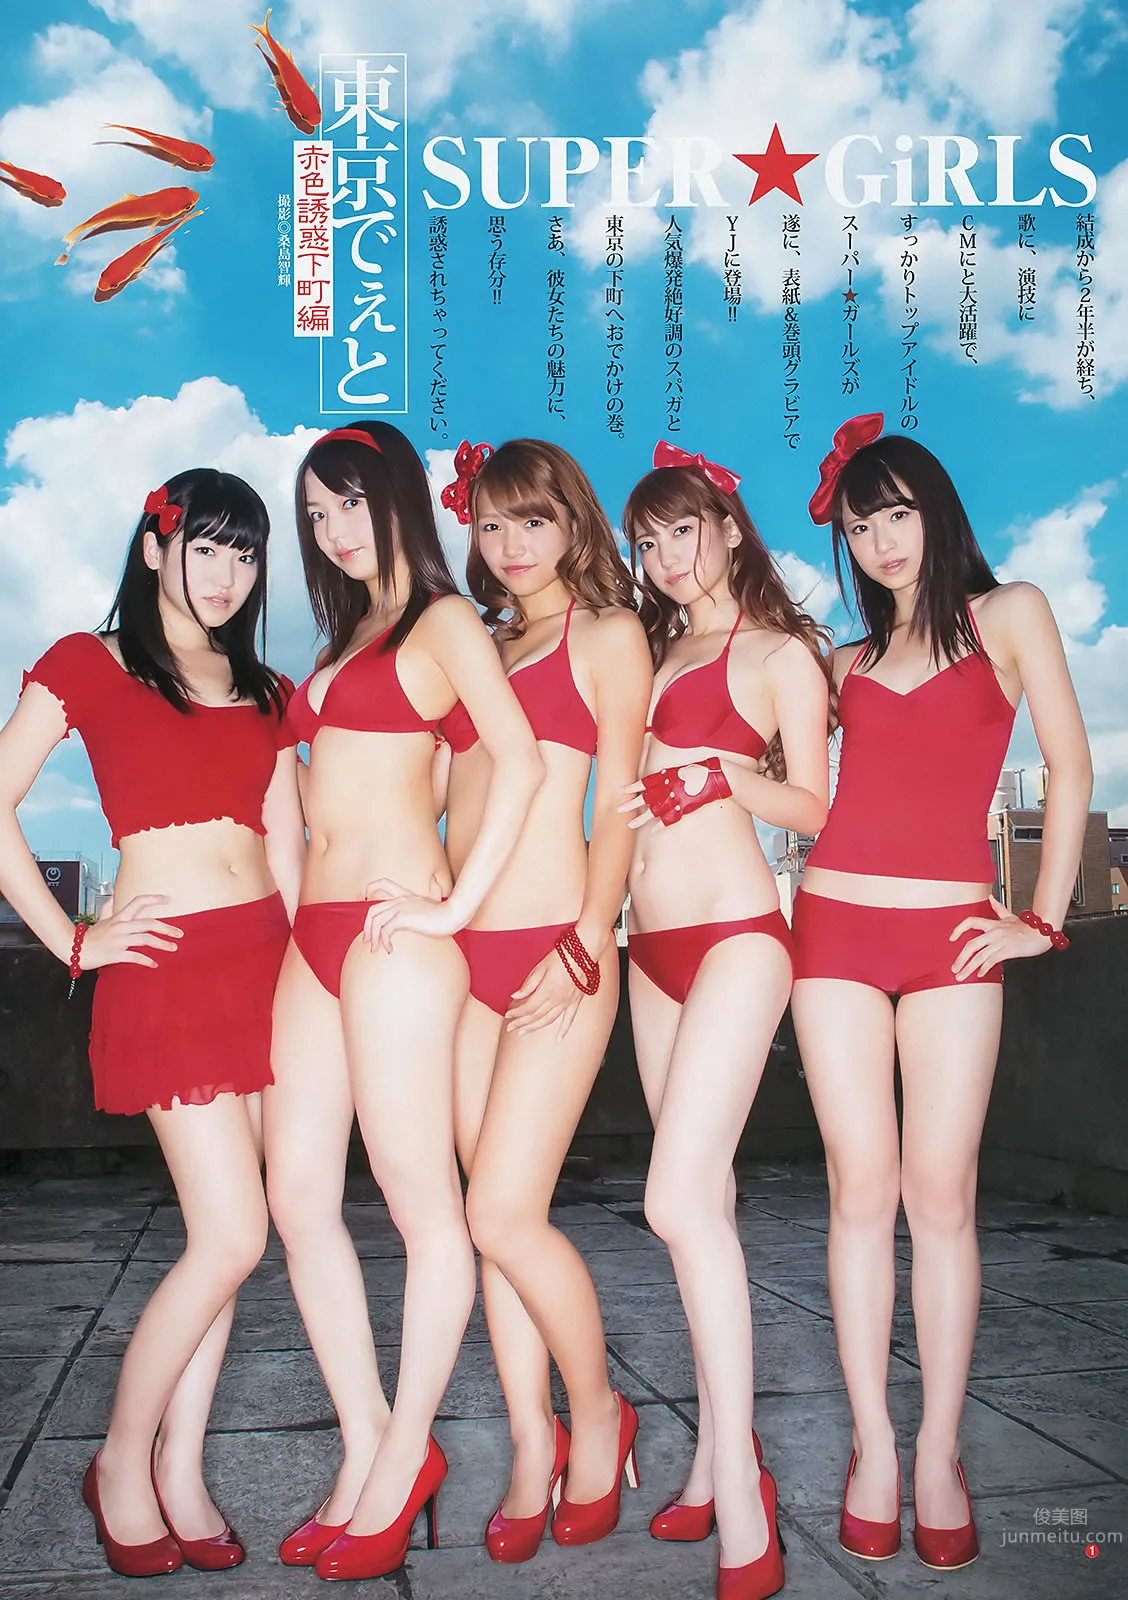 [Weekly Young Jump] 2012 No.45 46 SUPER☆GiRLS 佐々木もよこ 山本彩 松井咲子_3